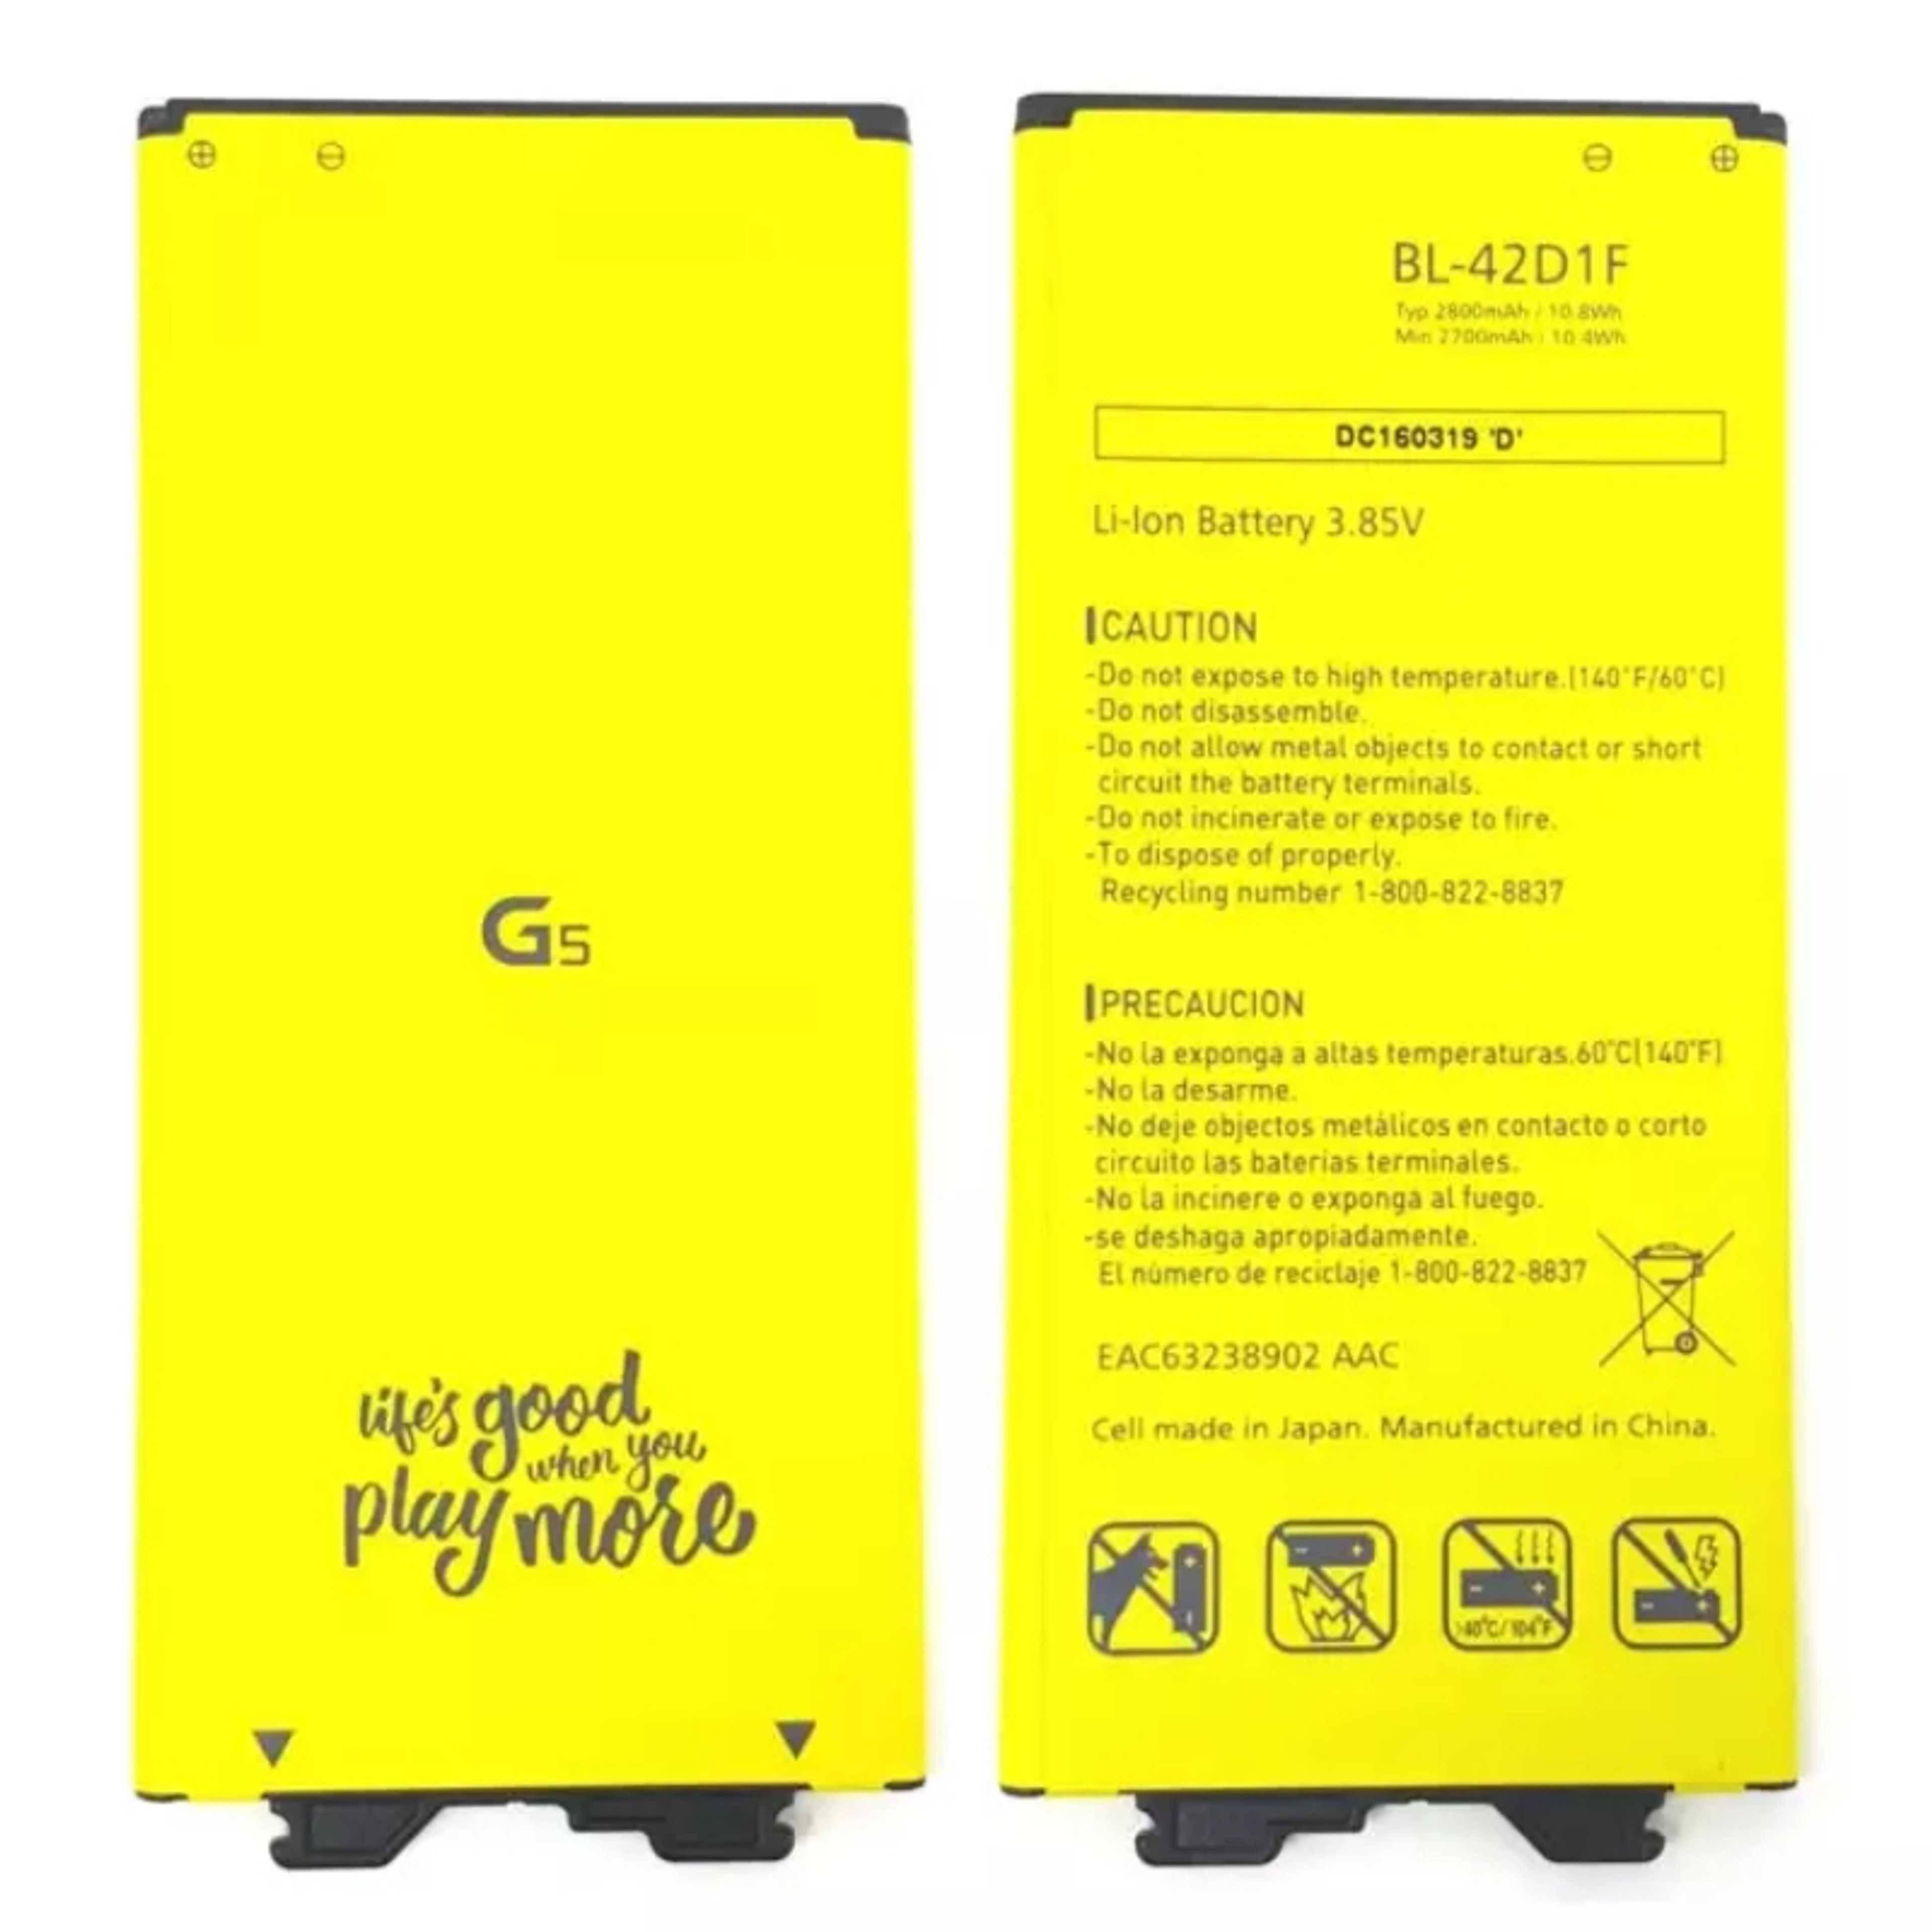 BL-42D1F - Battery For LG_G5 H868 H860 - 2800mAh - Yellow